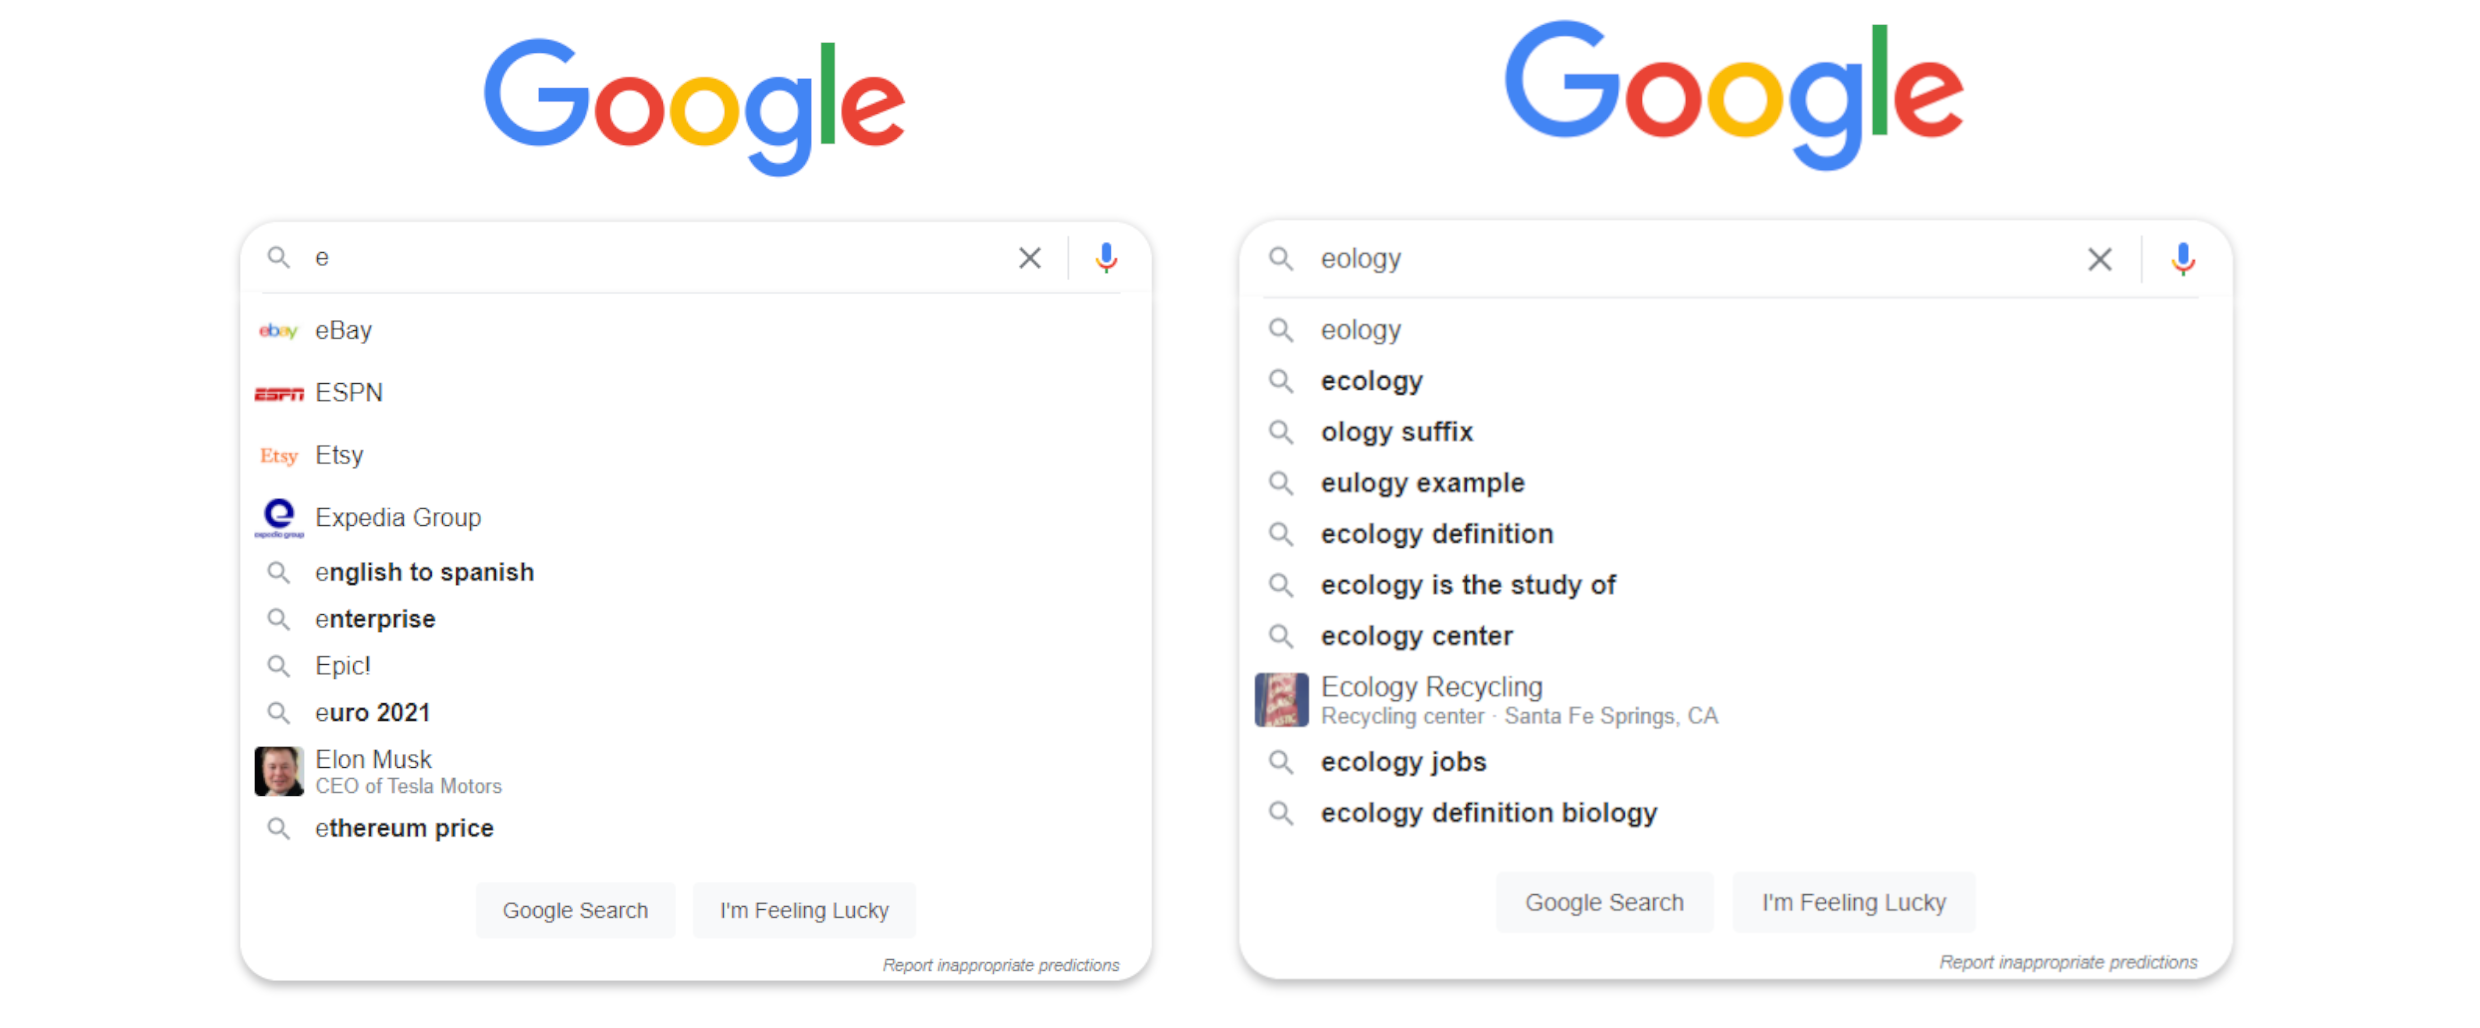 Google Suggests suggestions for the letter "E" and the keyword "eology"